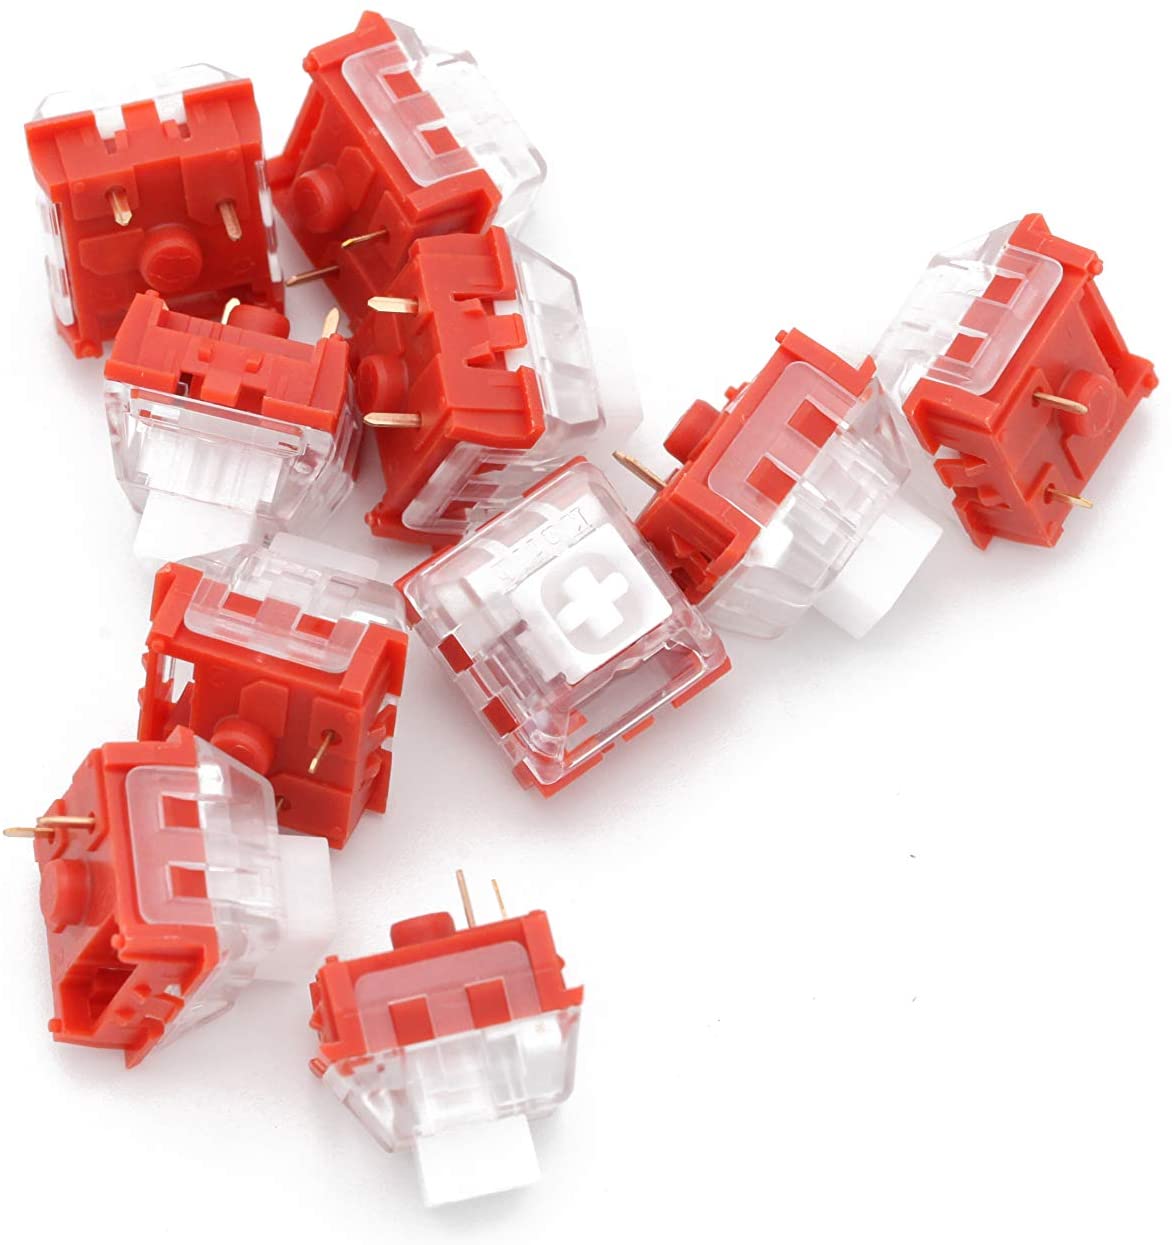 Kailh Box Red Pro 35g Linear Plate Mount Switch MKVFZCWMW4 |0|